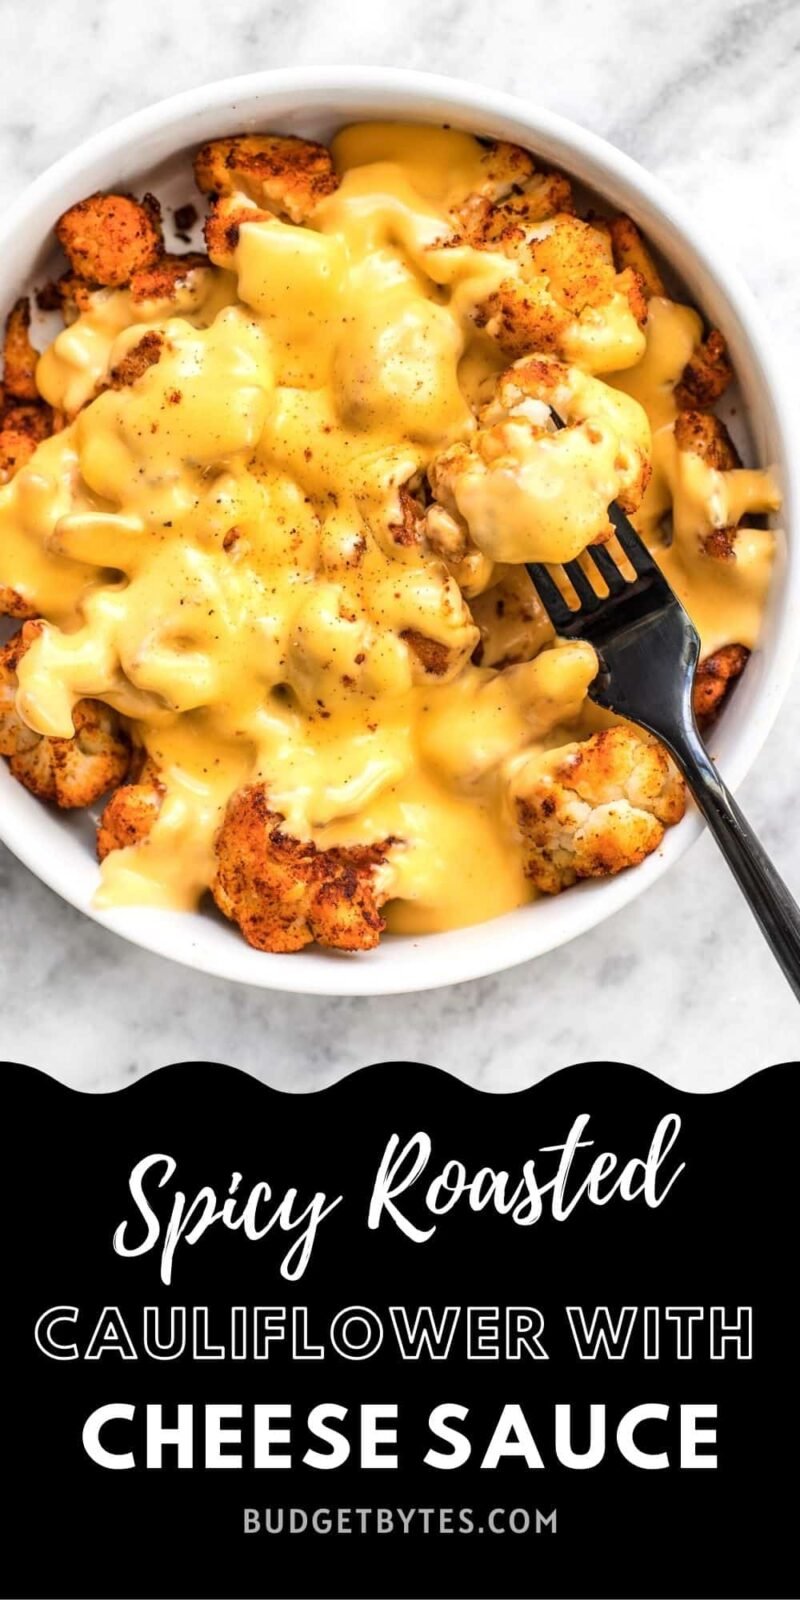 a bowl of roasted cauliflower covered in cheese sauce, title text at the bottom